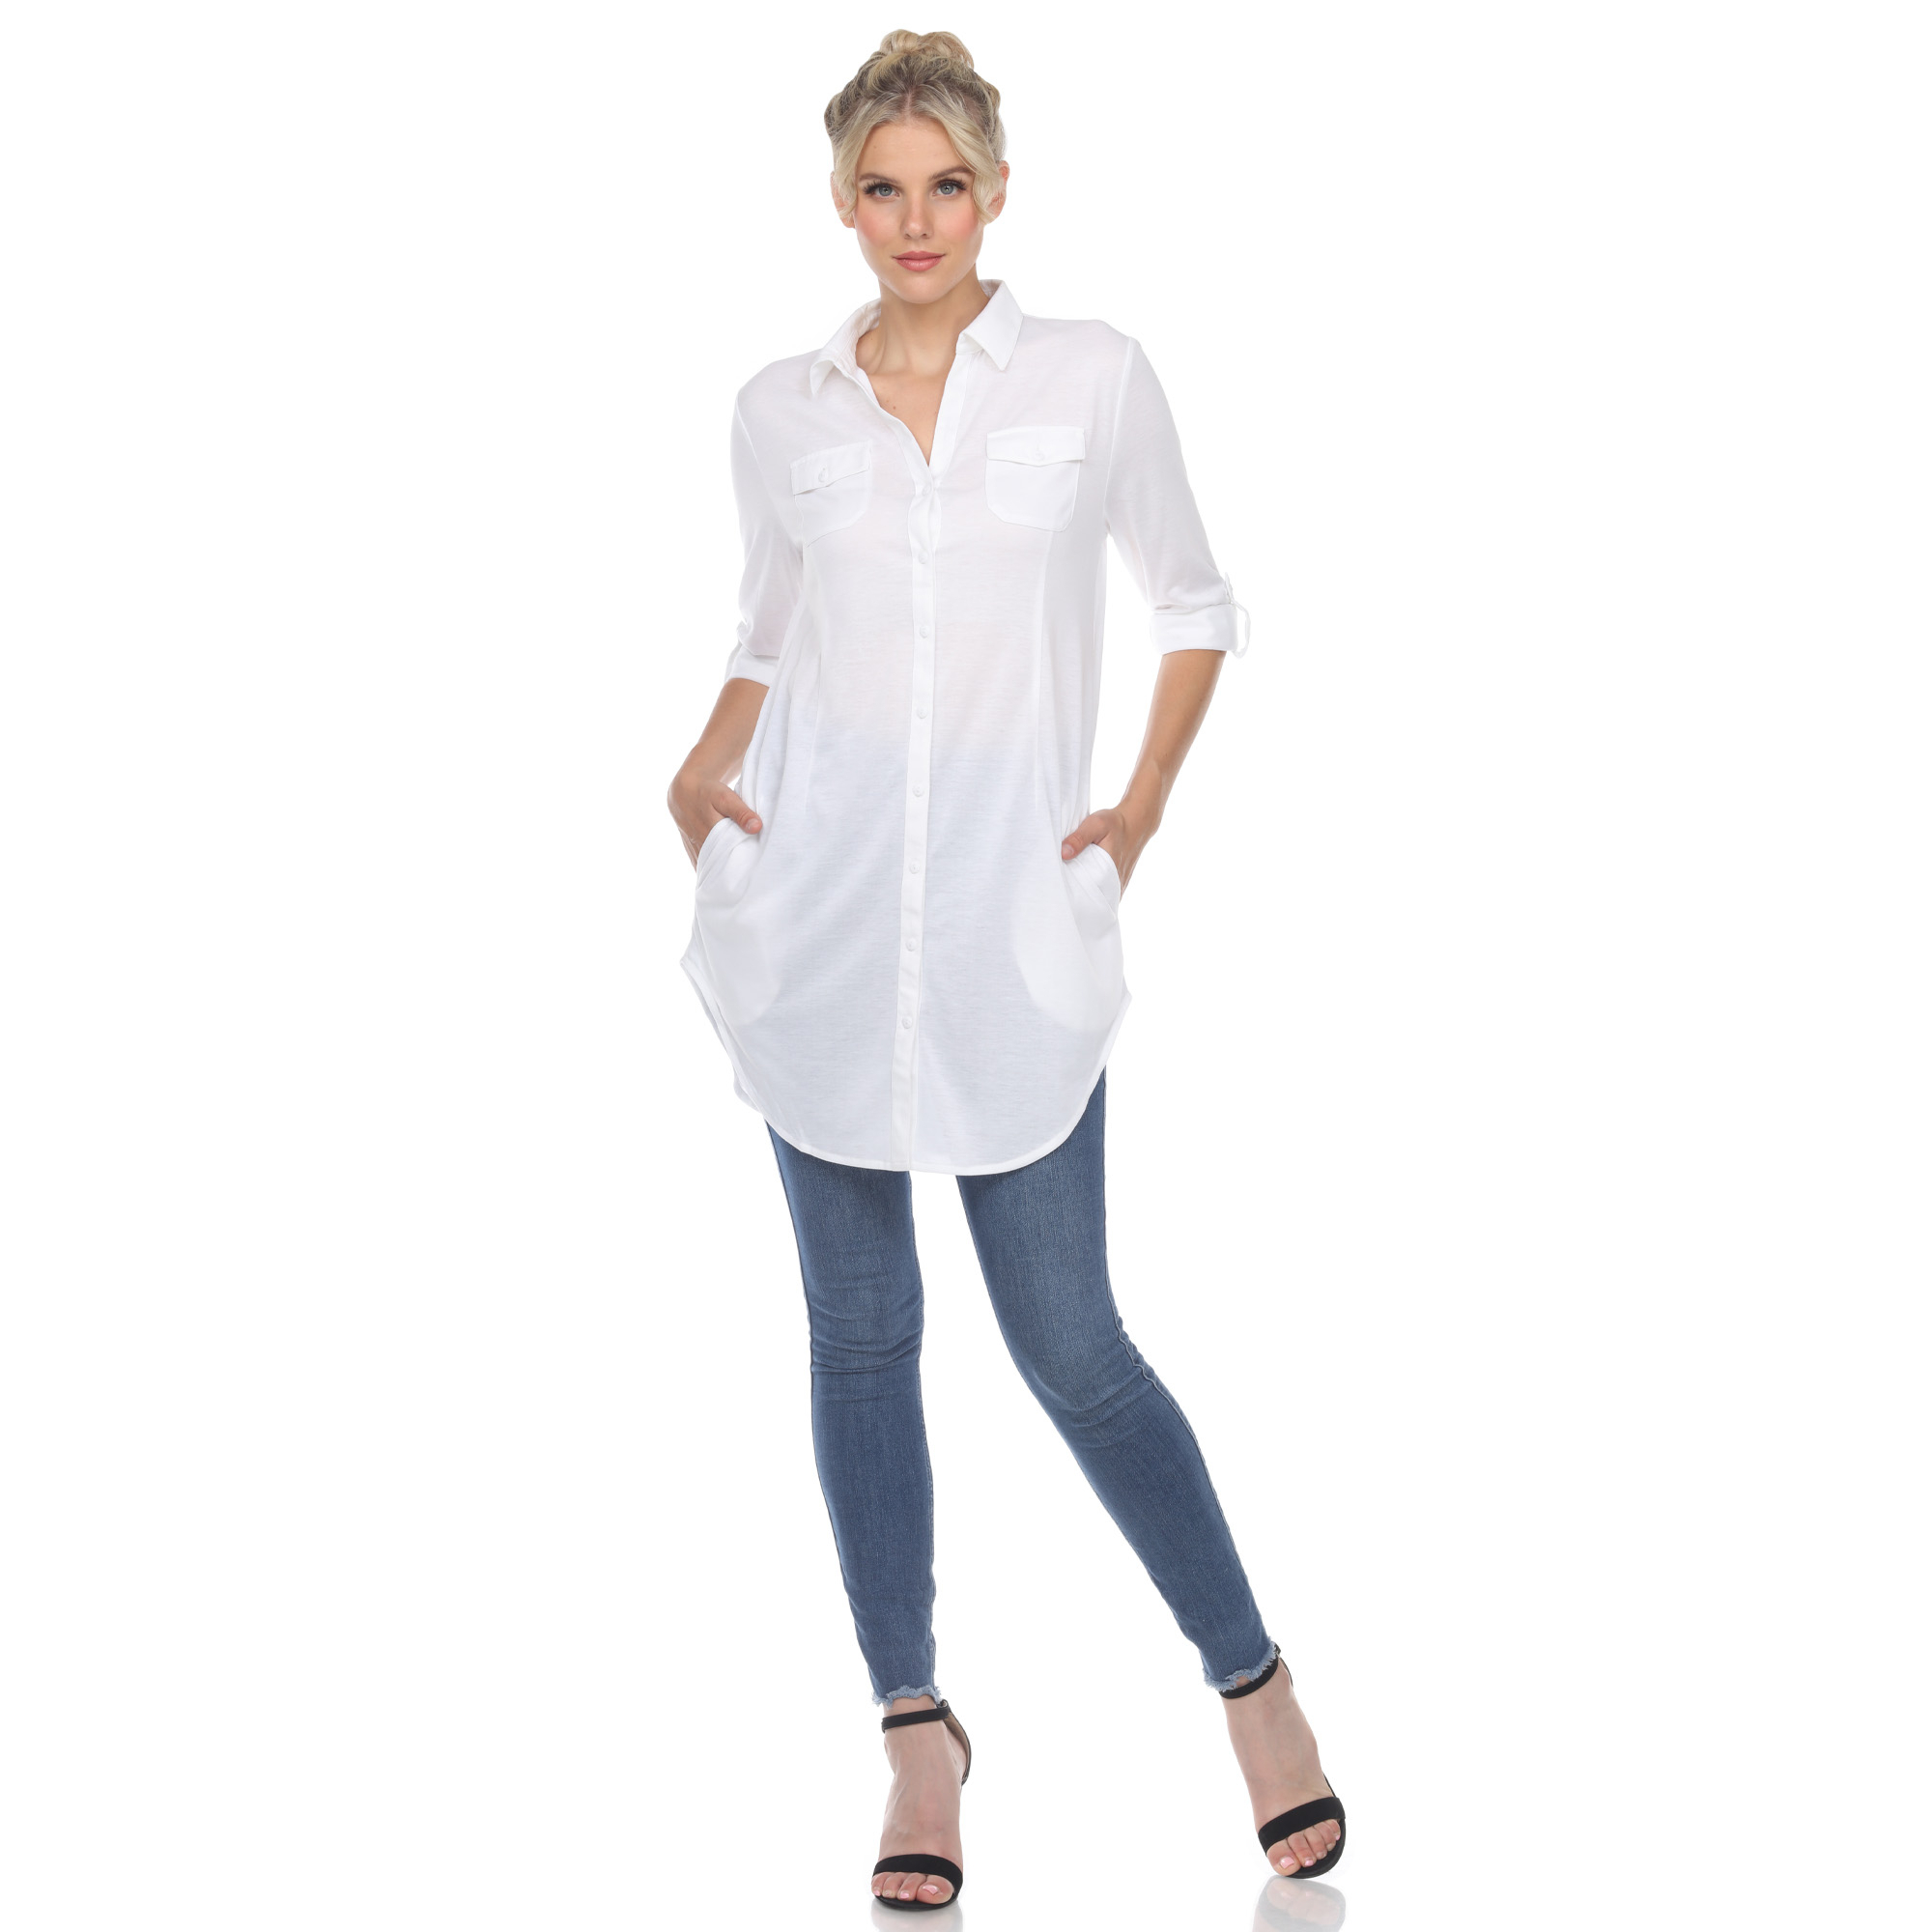 White Mark Women's Stretchy Quarter Sleeve Button Down Tunic Top With Pockets - White, 3X